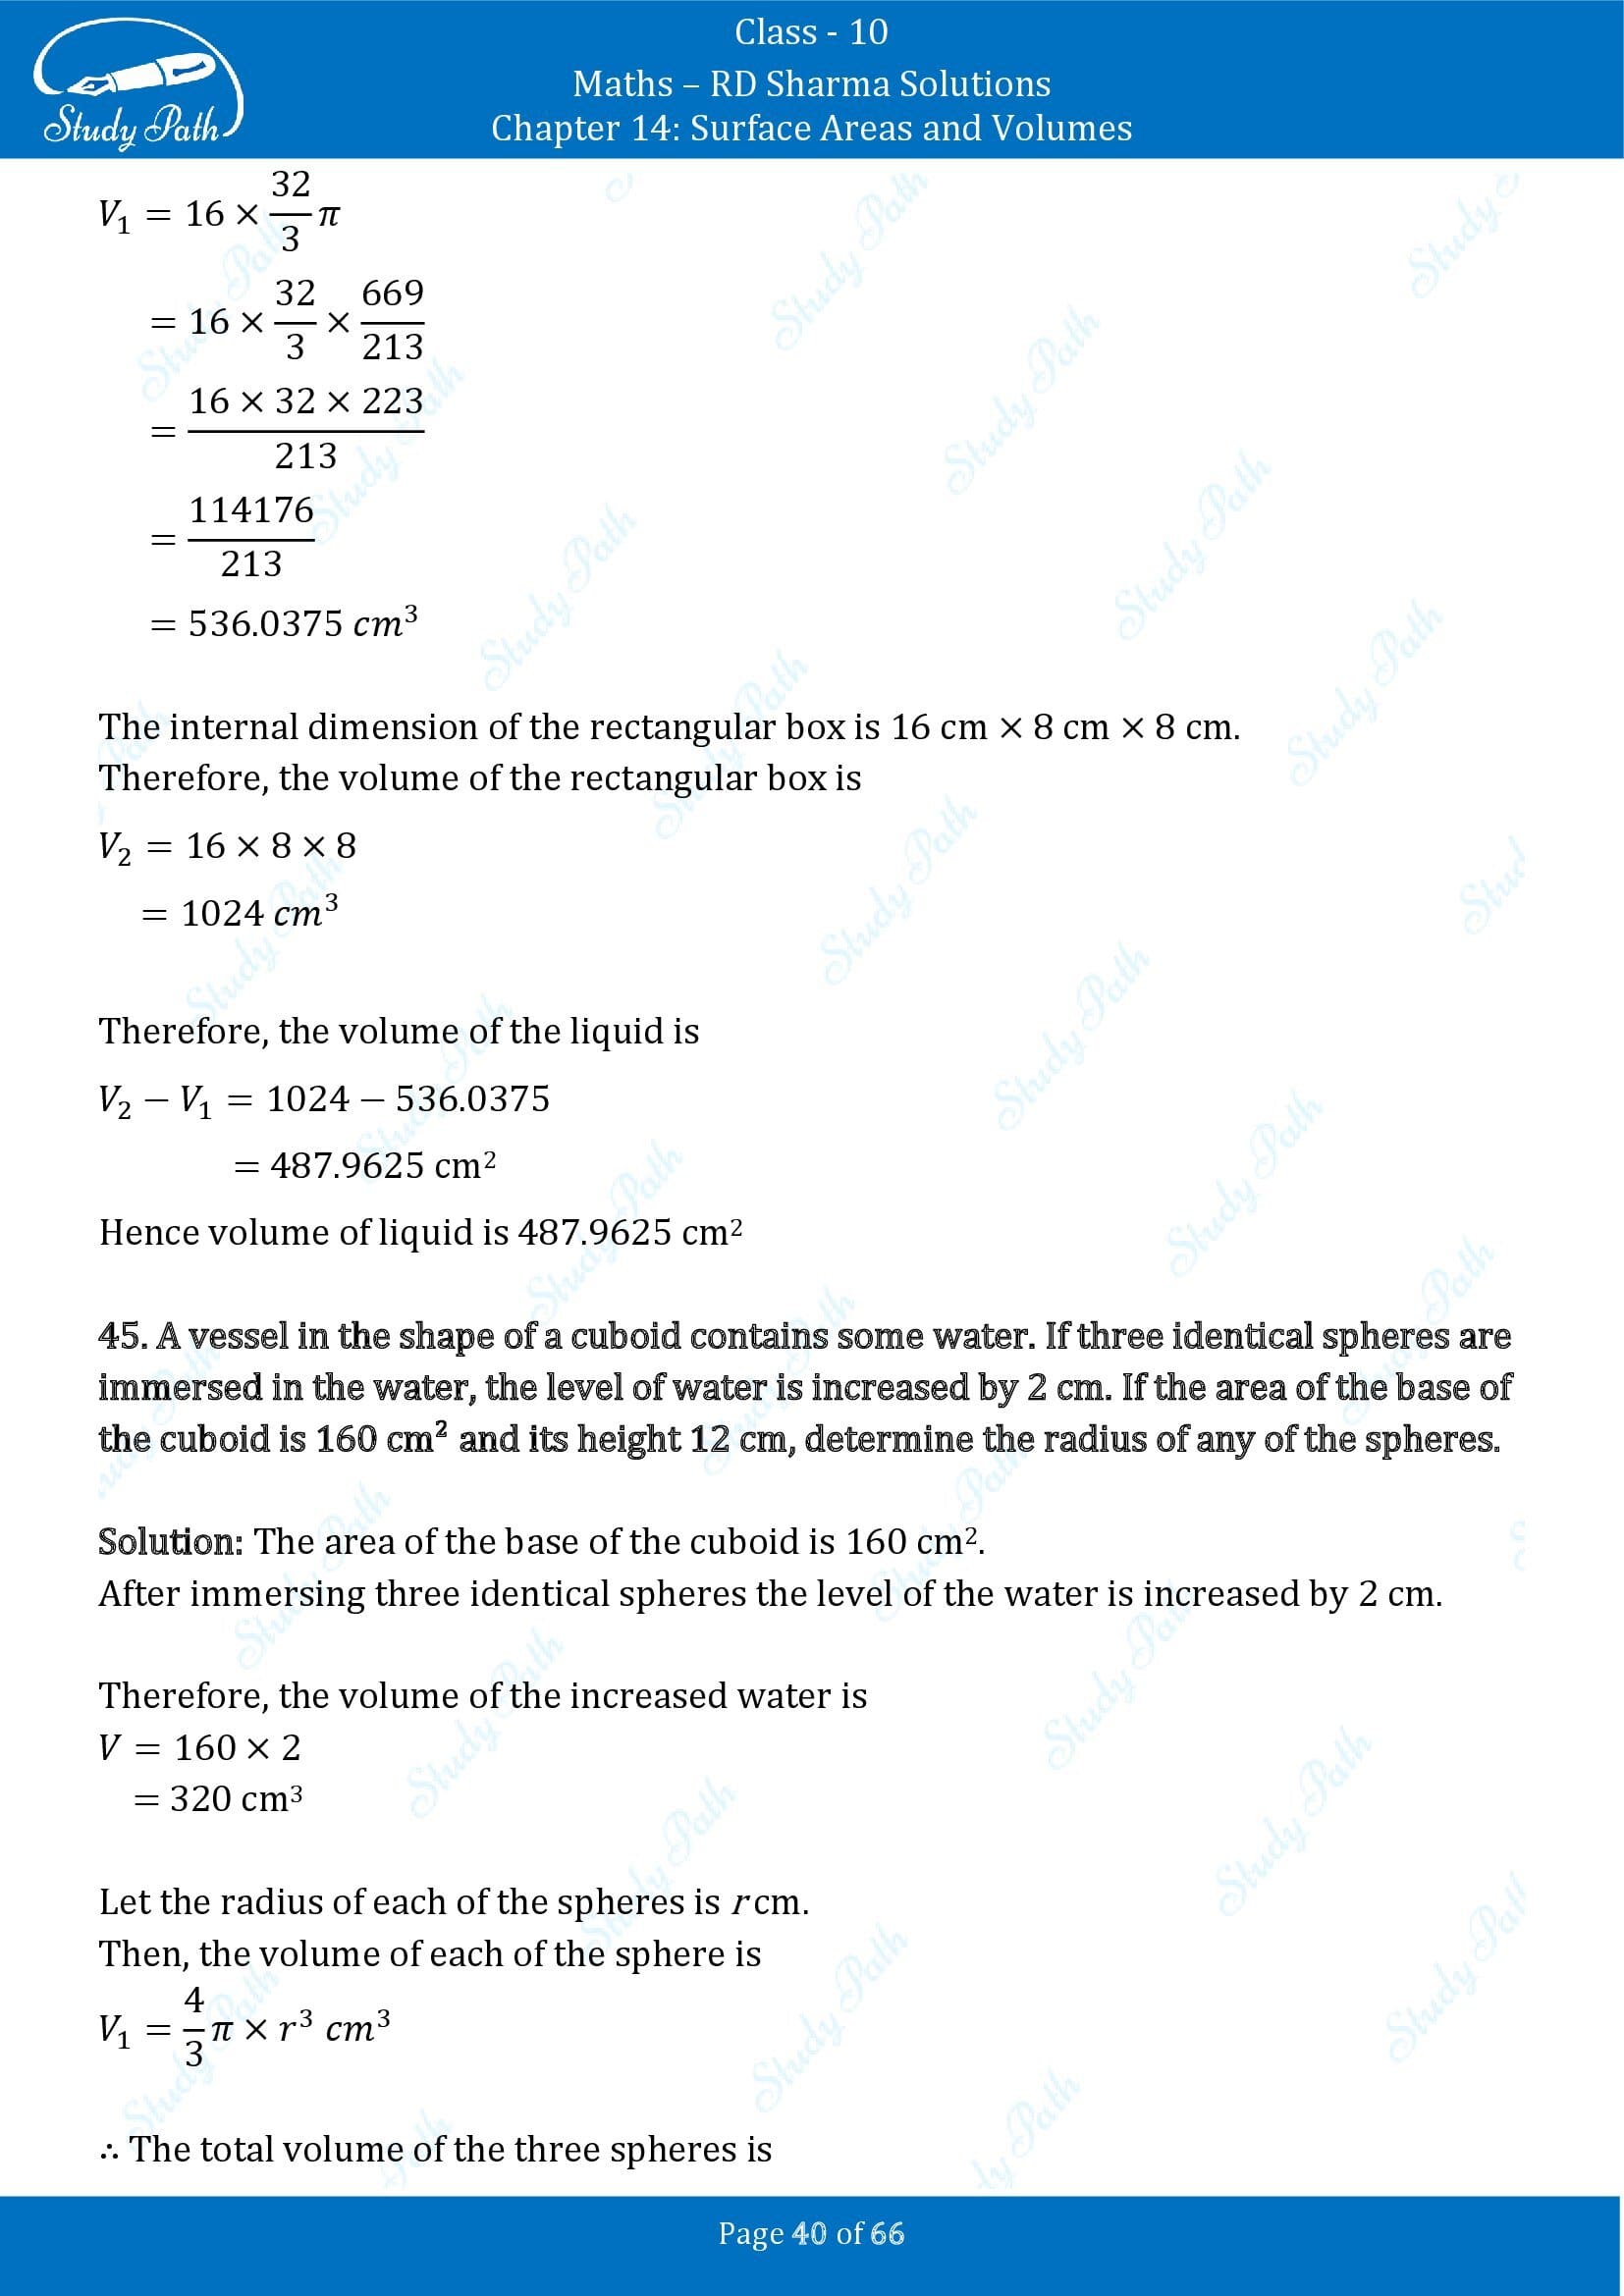 RD Sharma Solutions Class 10 Chapter 14 Surface Areas and Volumes Exercise 14.1 00040